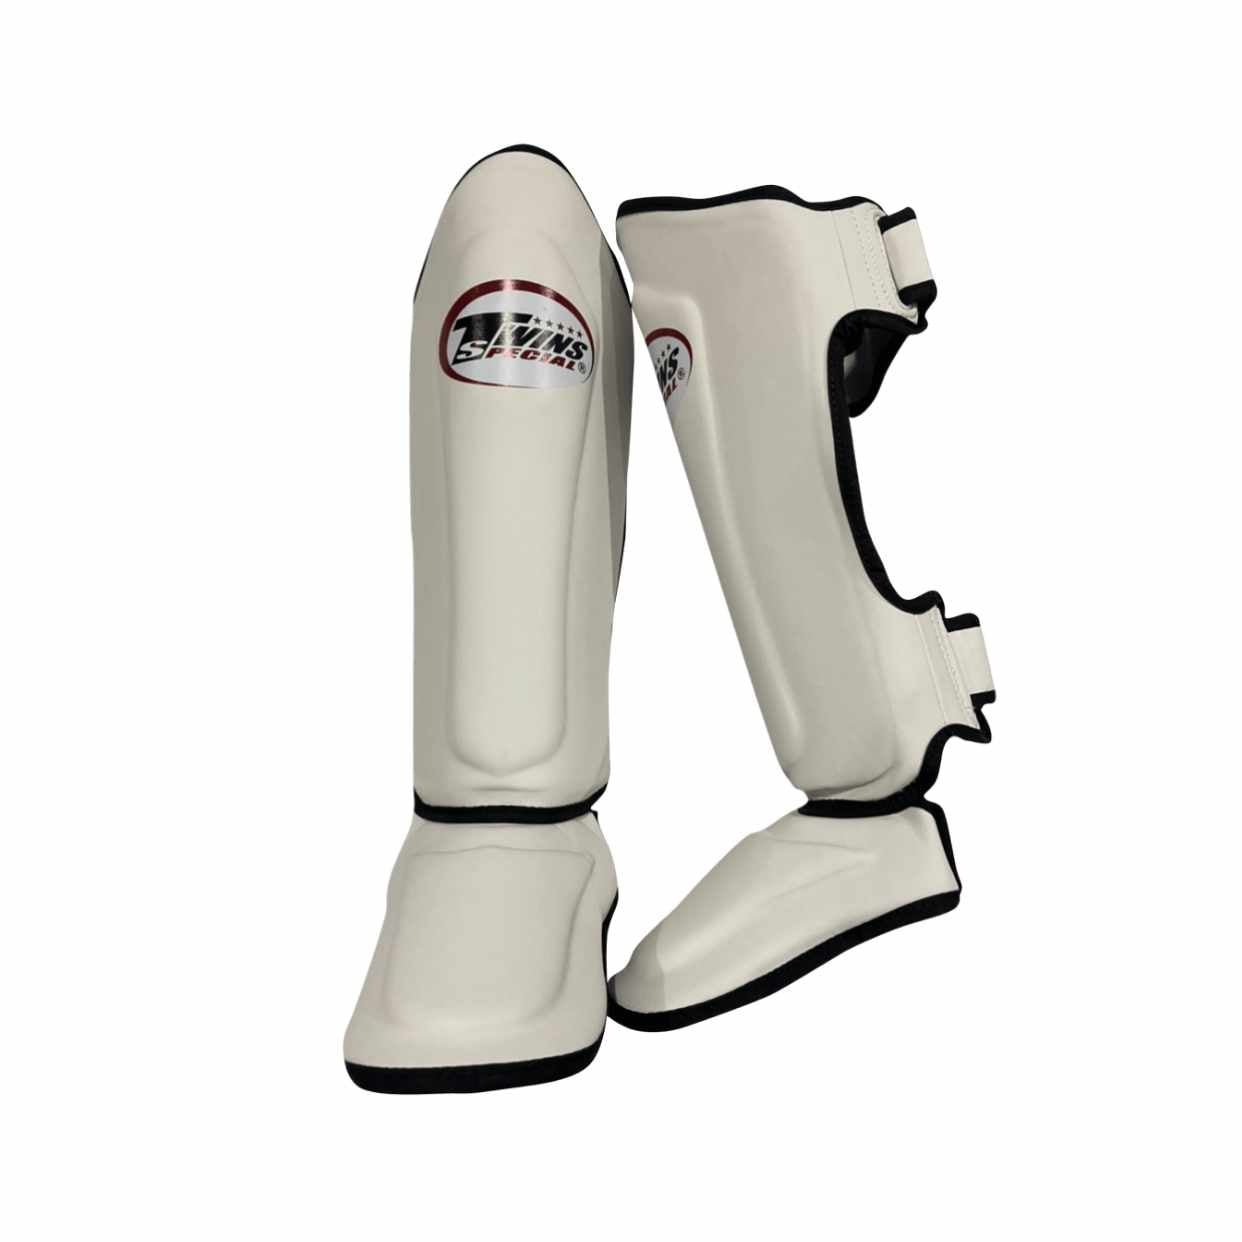 "Twins Special" Synthetic Leather Shin Guard SGS10 White